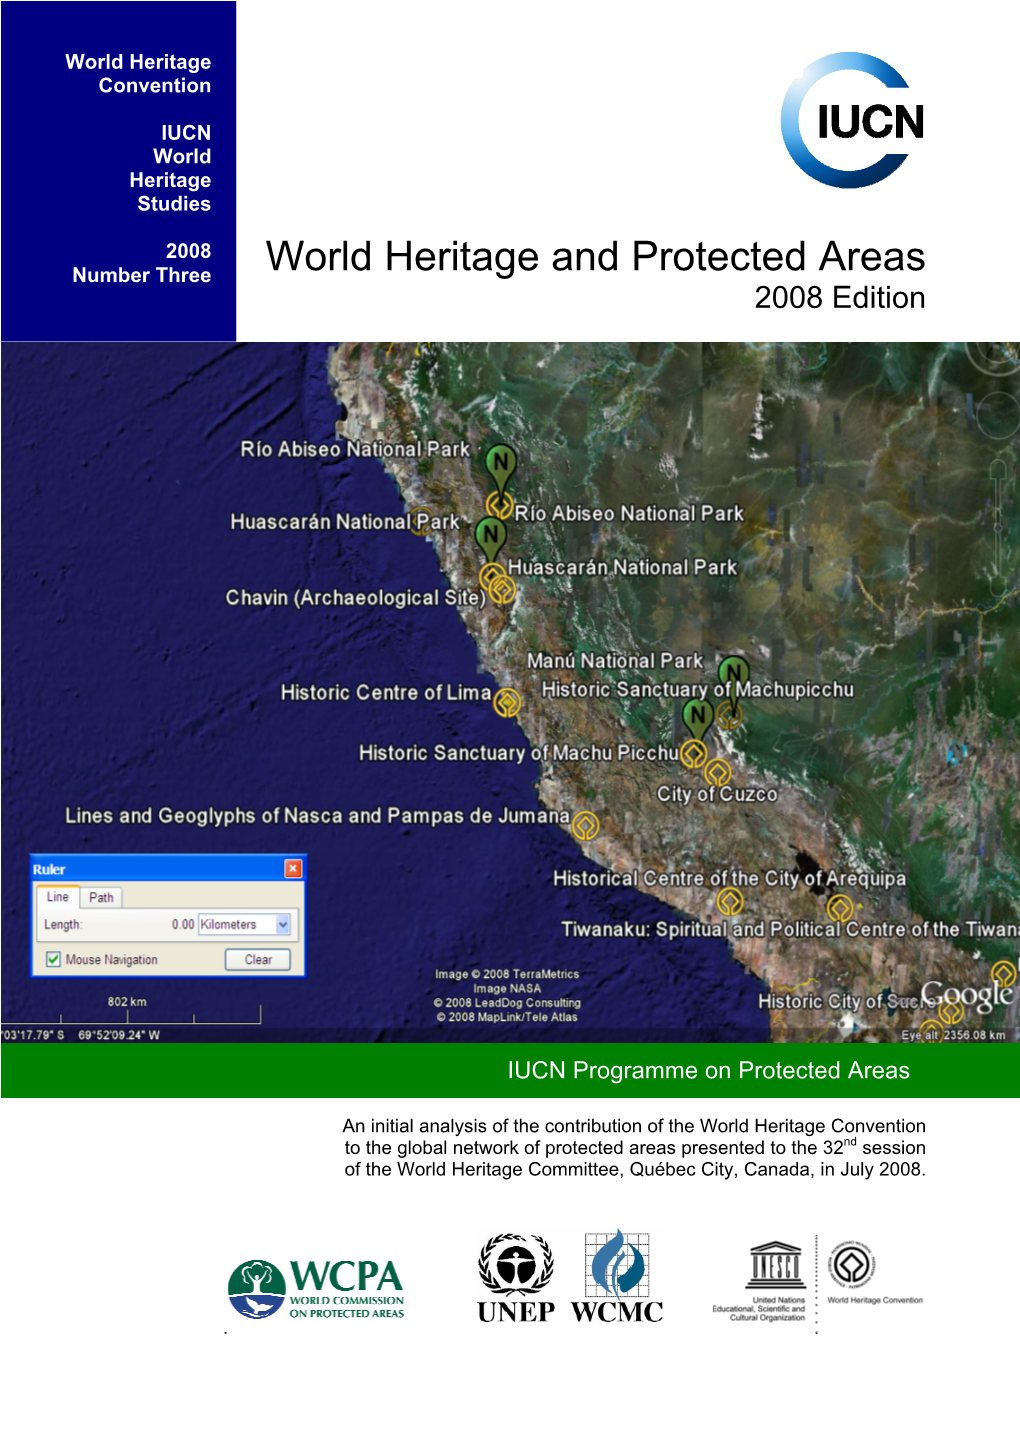 World Heritage and Protected Areas 2008 Edition